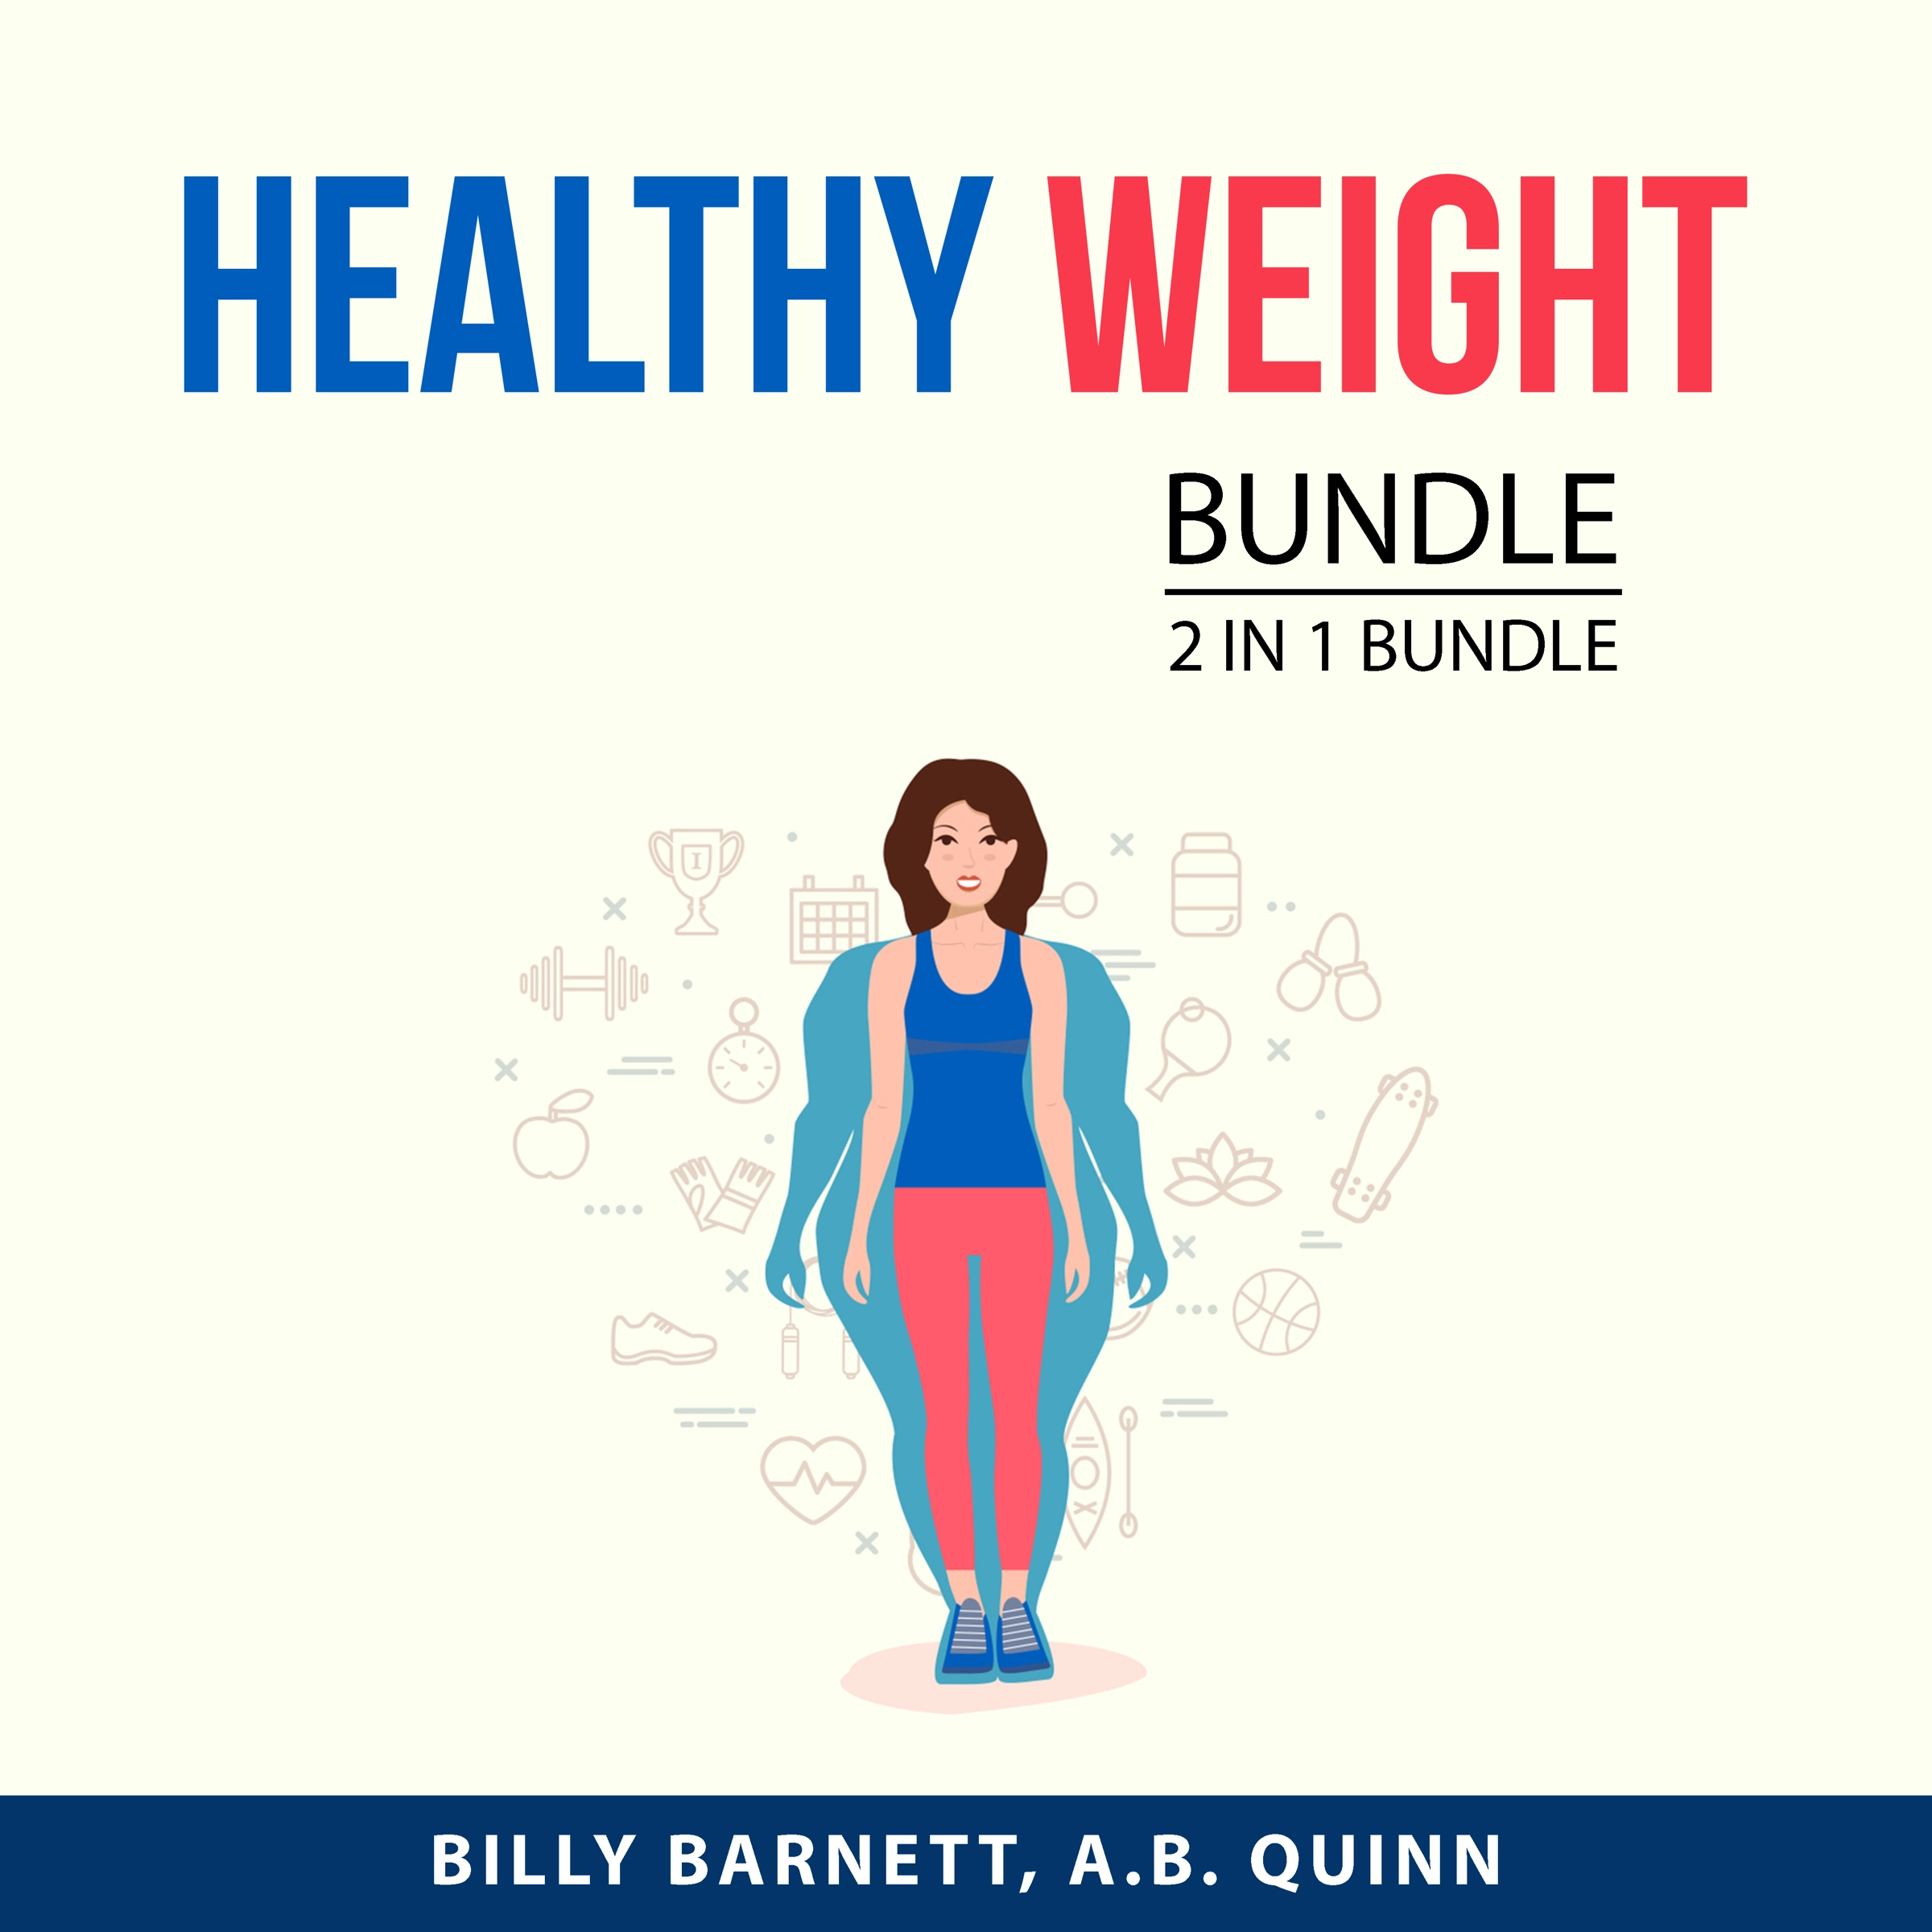 Healthy Weight Bundle, 2 in 1 Bundle: Audiobook by A.B. Quinn